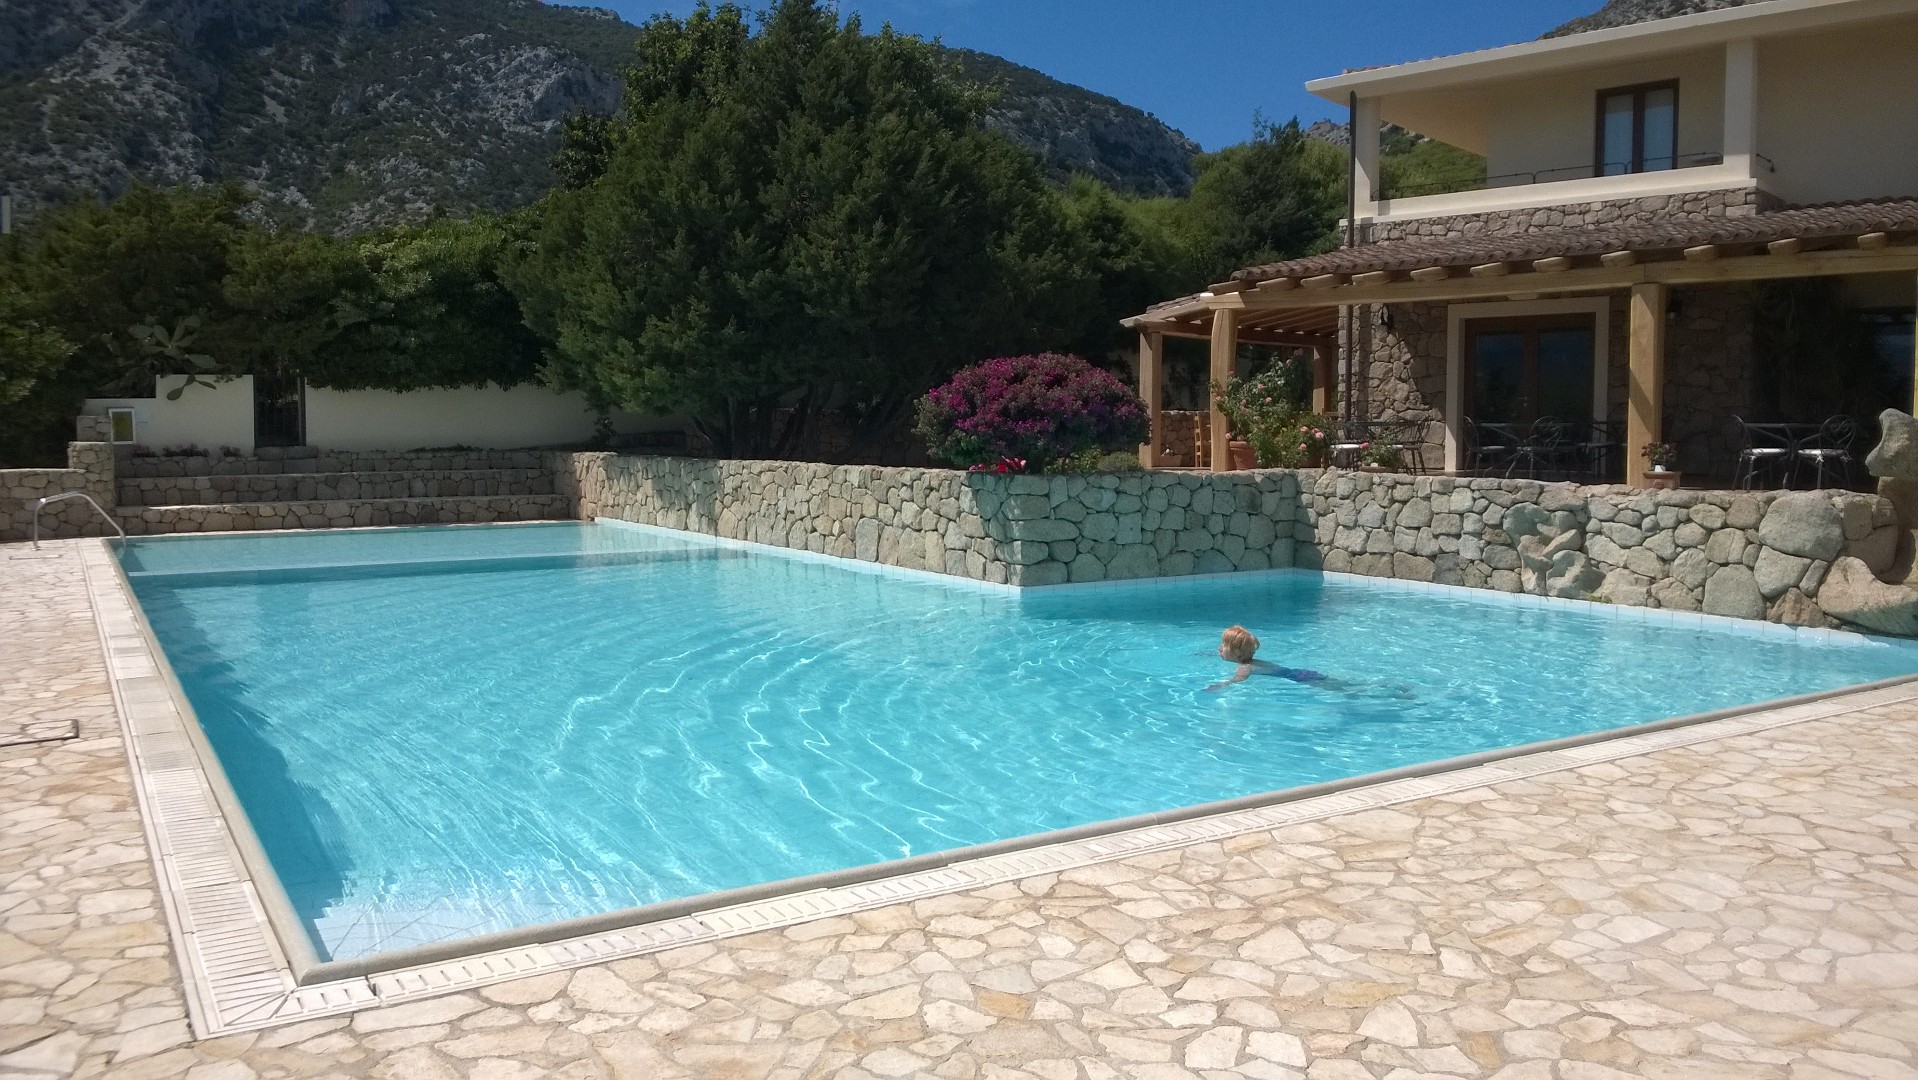 [Tuesday 7th June, swimming in the pool at the Gustui Maris Hotel, Cala Gonone, Sardinia.